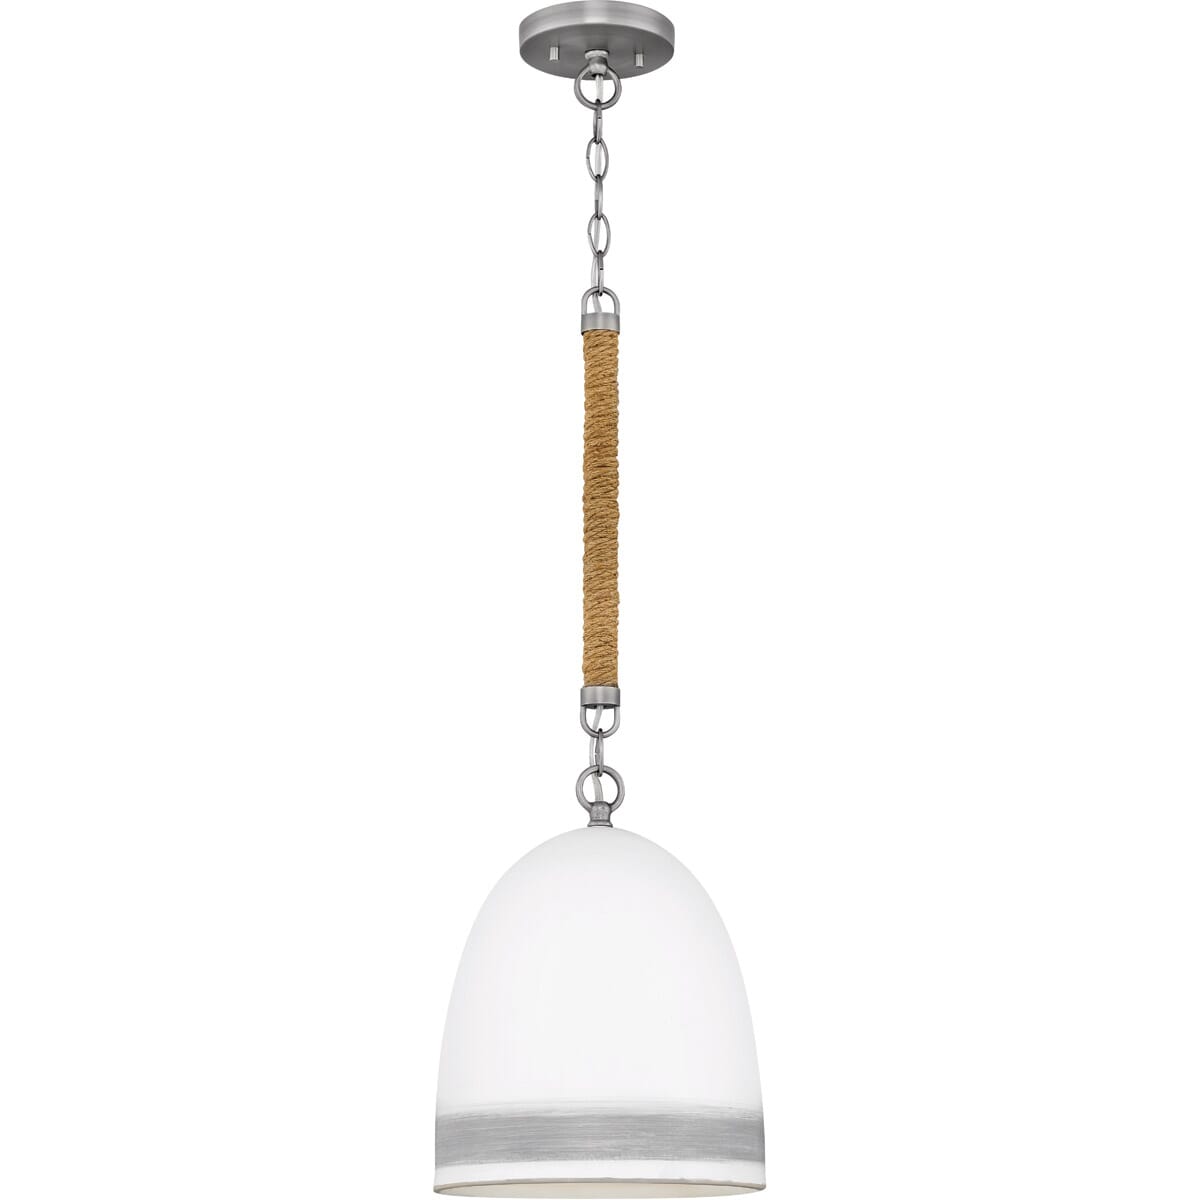 Pol Hinkley 3131CM Transitional One Light Pendant from Congress collection in Chrome Nckl.finish, 